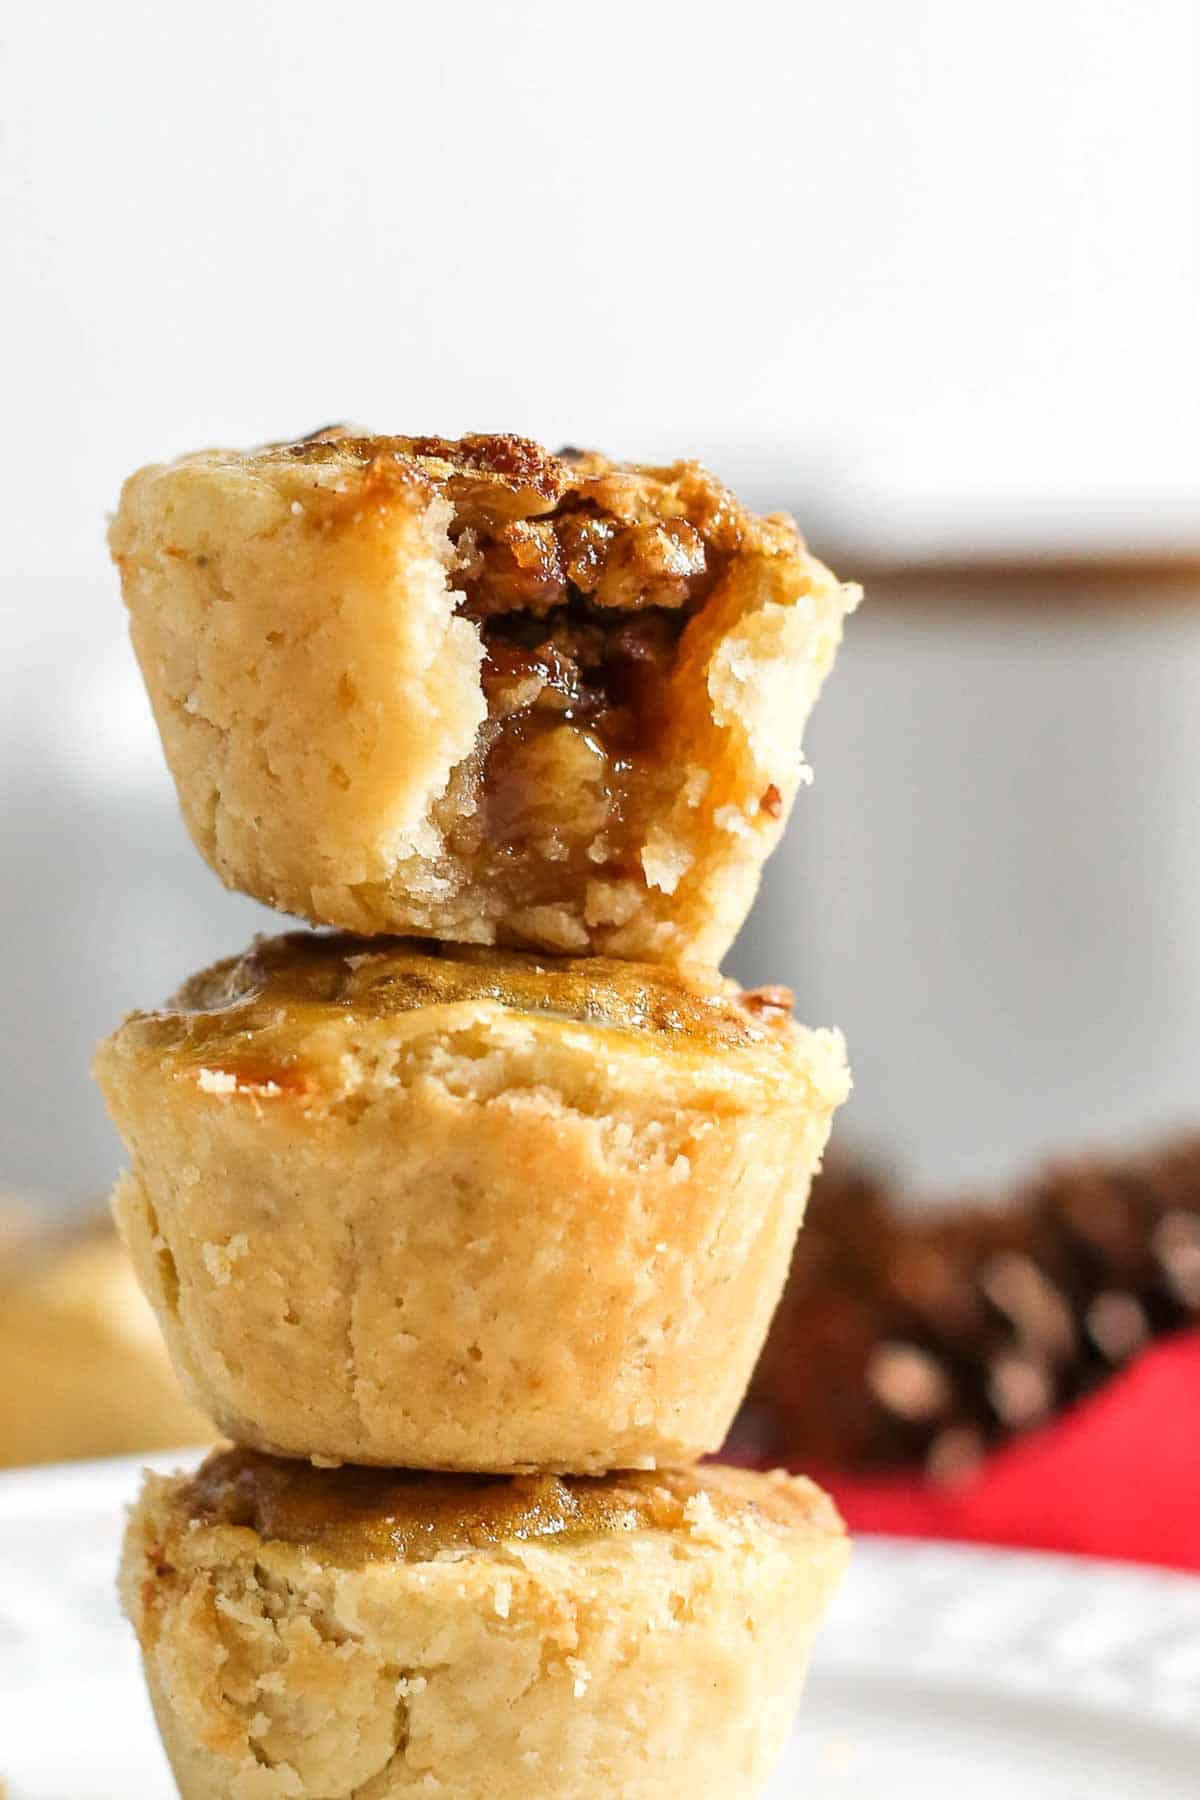 Pecan tassie nut cups stacked on top of each other.